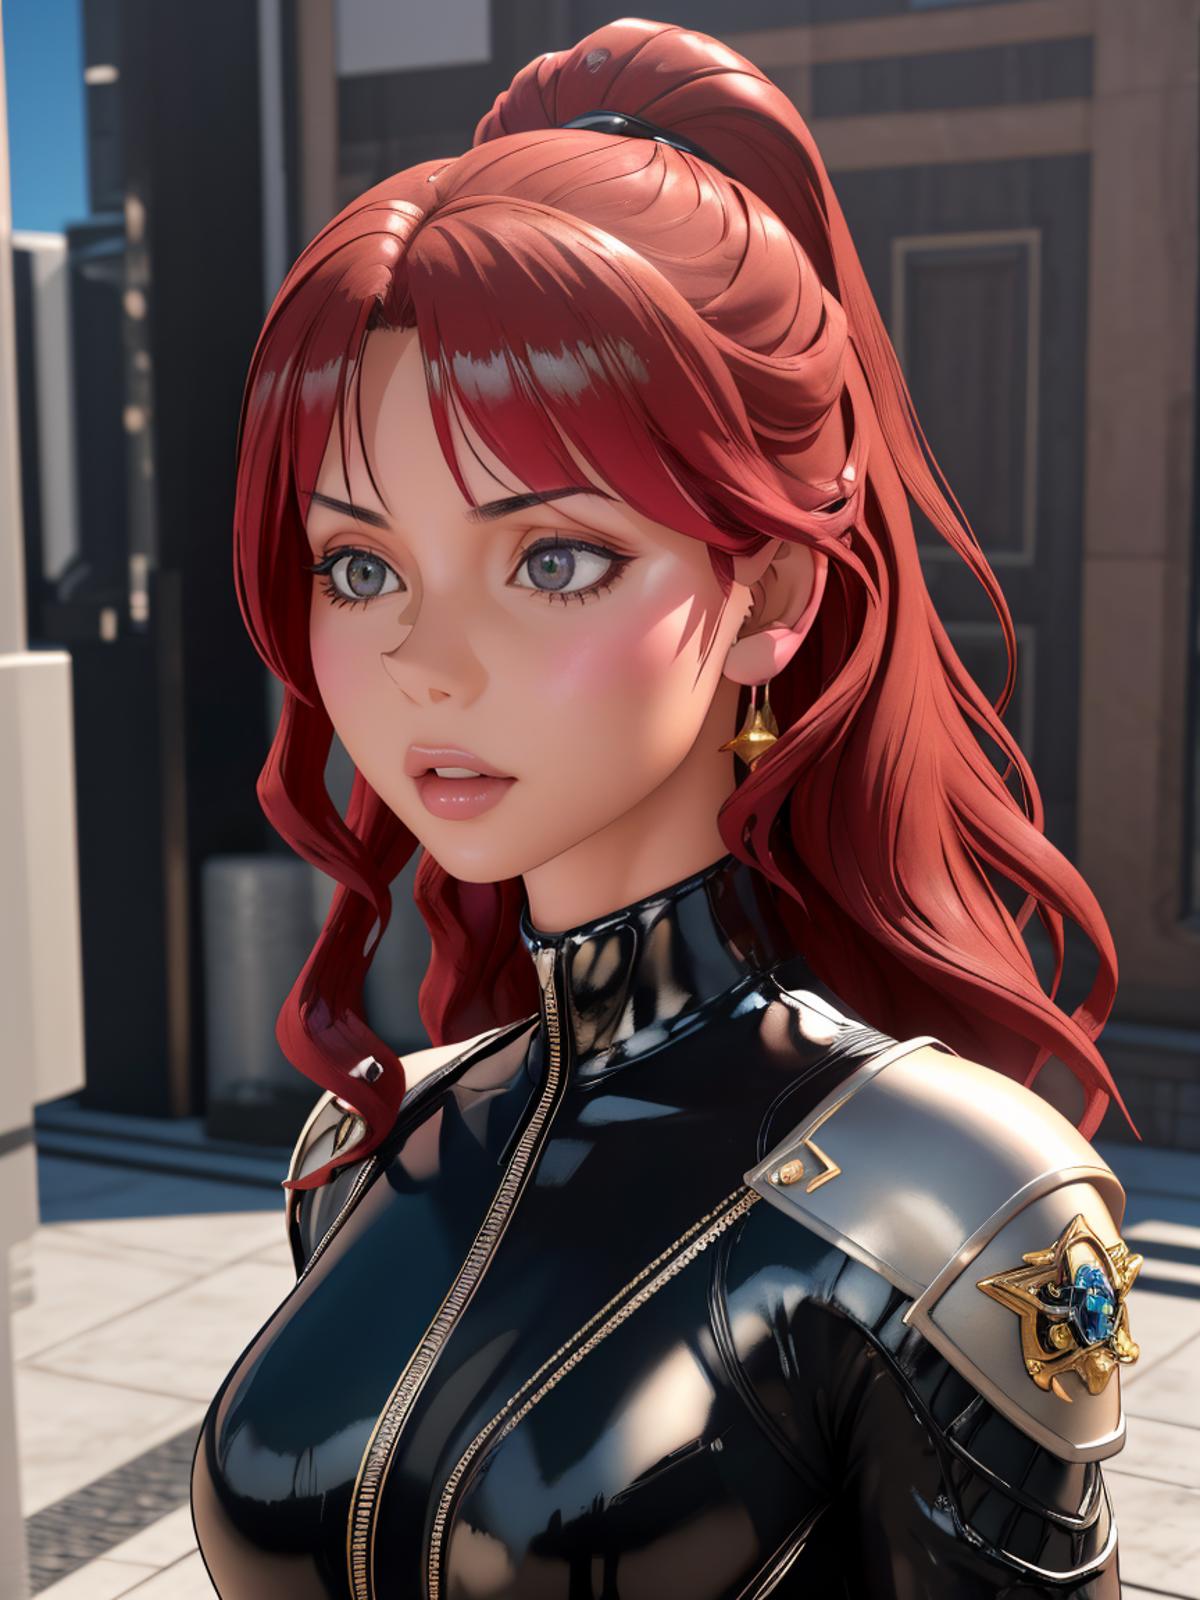 A 3D animated character with red hair, a black top, and a star on her shoulder.